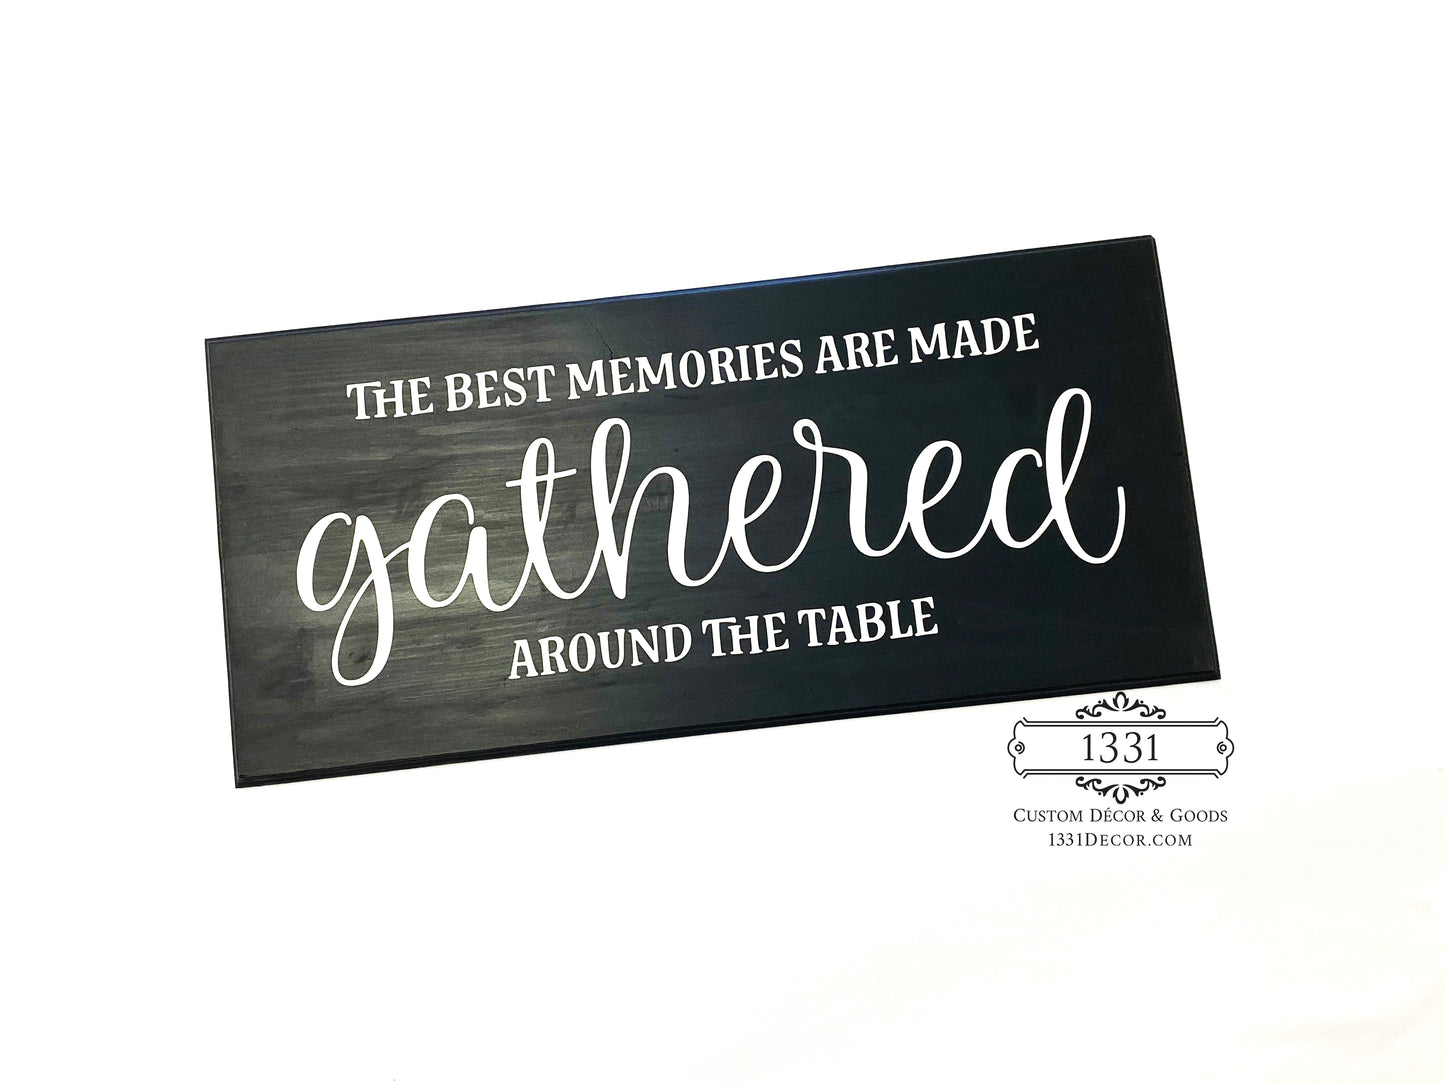 The Best Memories Are Made Gathered Around The Table, Kitchen Sign, Kitchen Memories, Family Kitchen Sign, Kitchen Decor